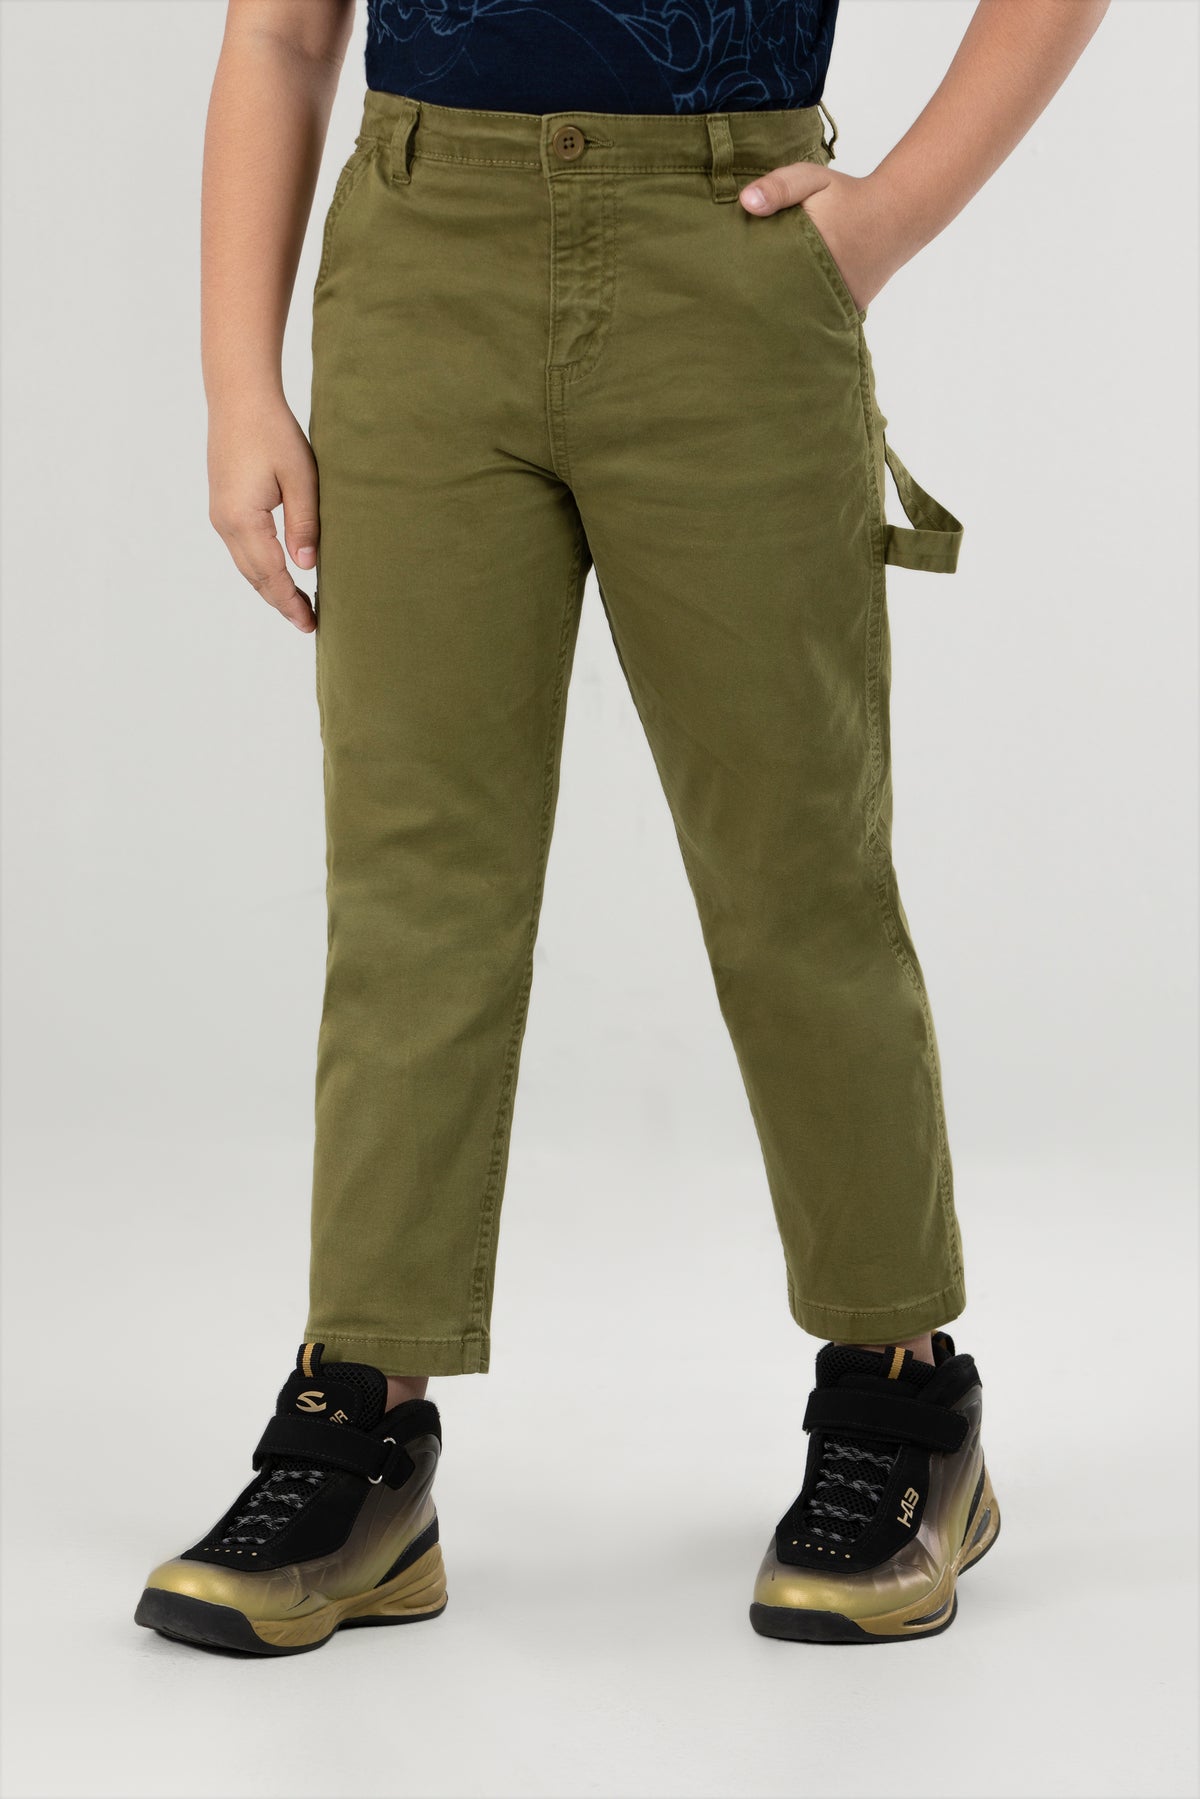 Prince Twill Trouser (2-4 Years)